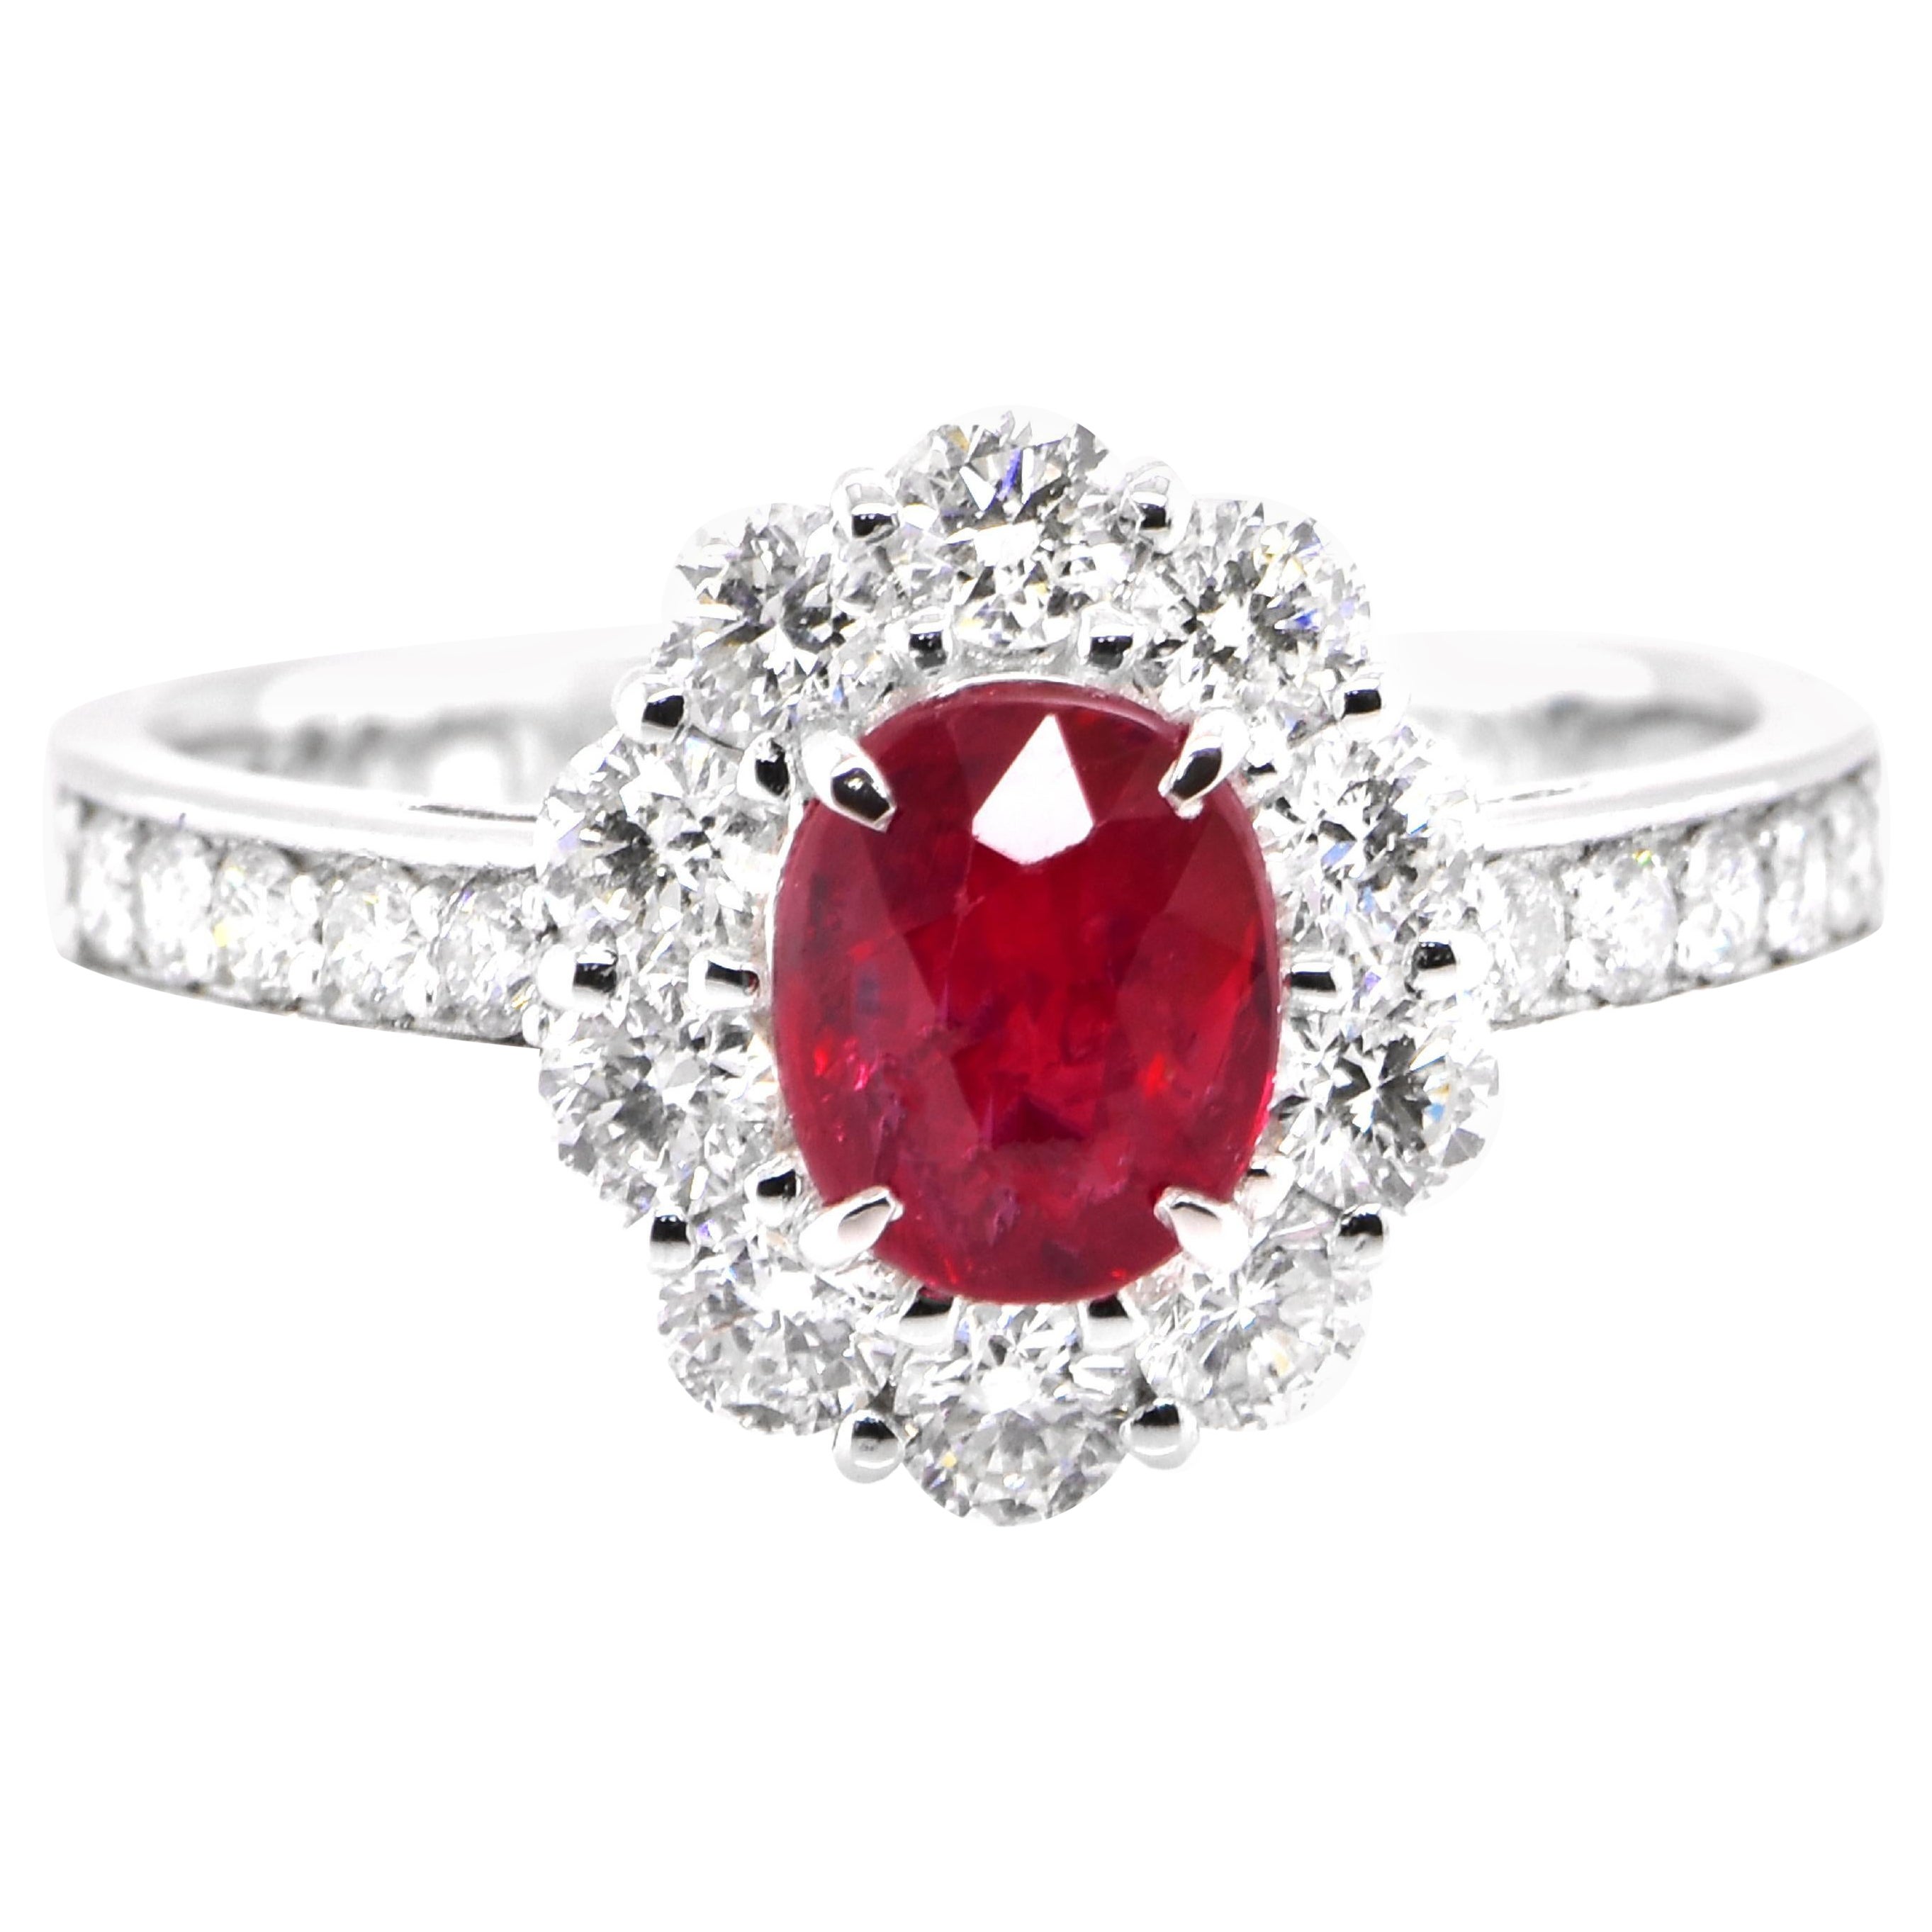 GIA Certified 0.99 Carat Unheated Ruby and Diamond Ring set in Platinum